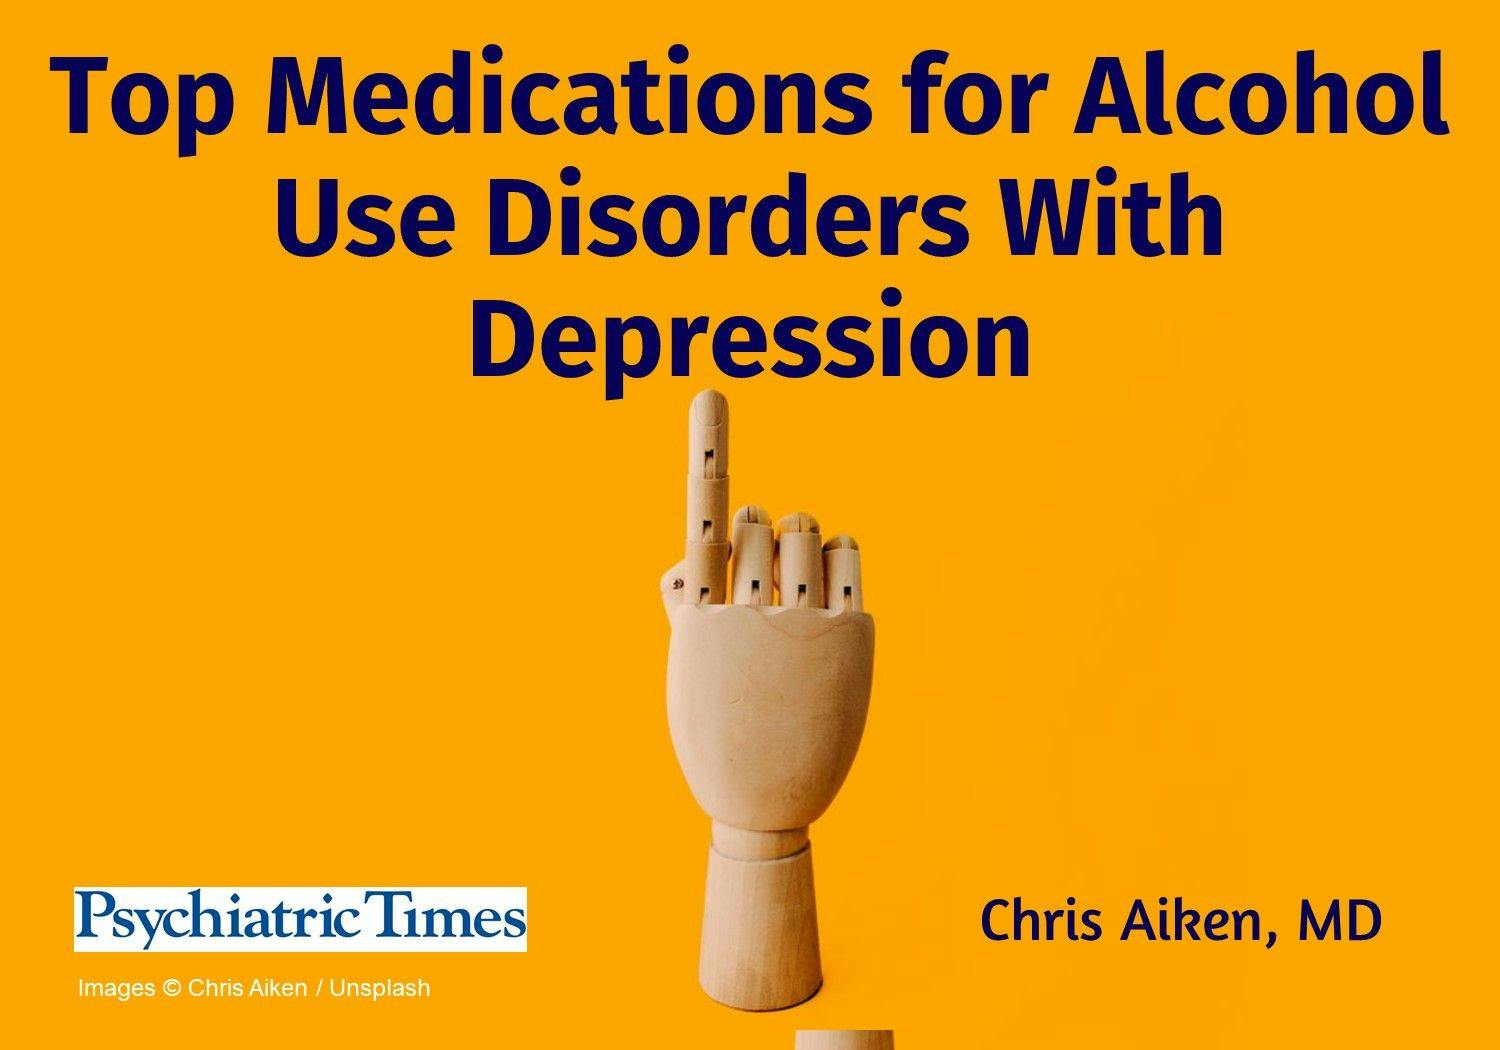 Top Medications for Alcohol Use Disorders With Depression